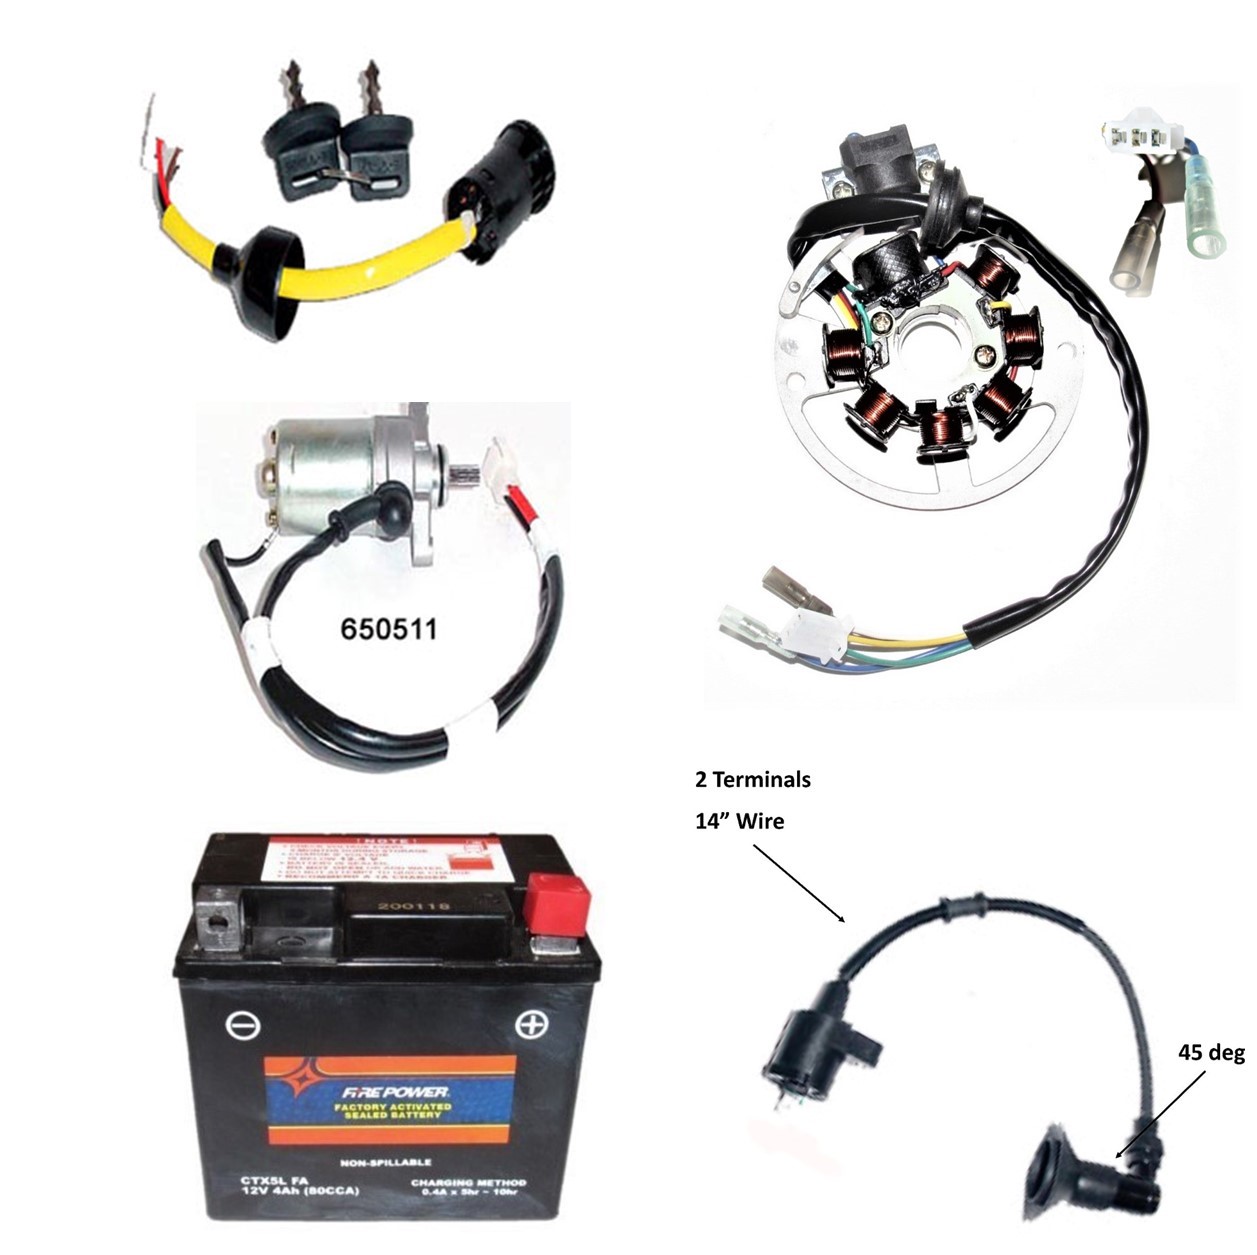 Battery - Coils - Switches Electrical Parts - Starters - More